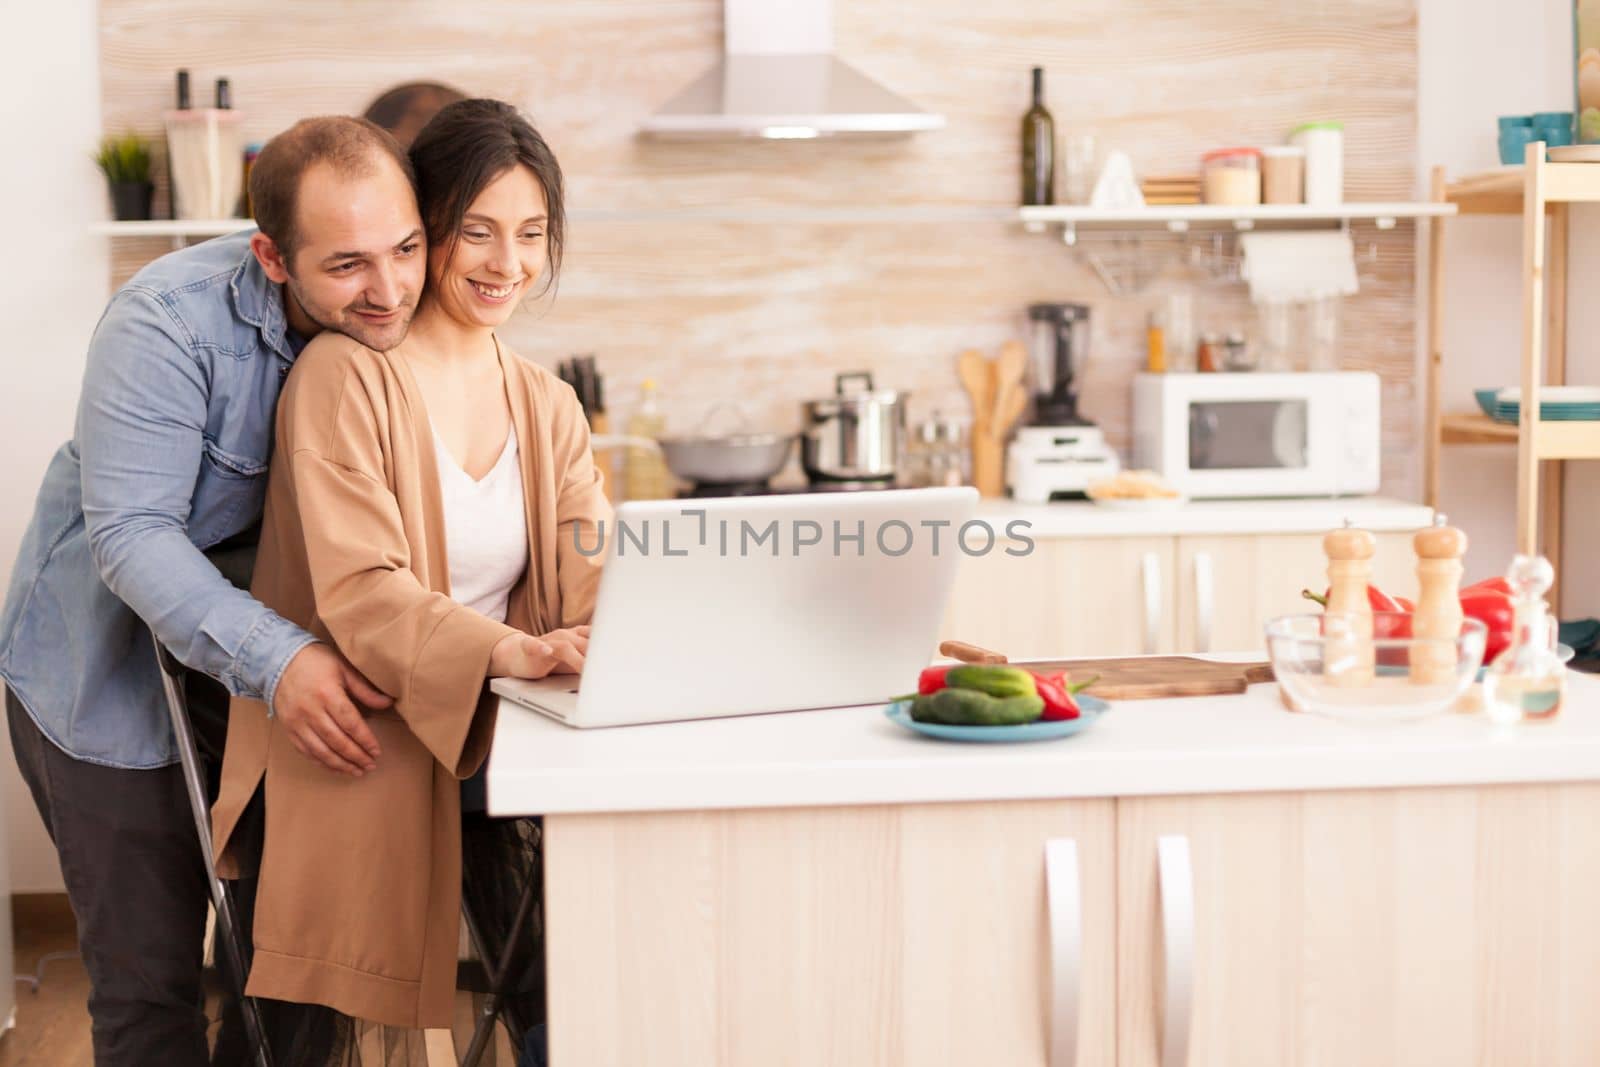 Cheerful couple using laptop in kitchen reading online recipe for breakfast. Happy loving cheerful romantic in love couple at home using modern wifi wireless internet technology